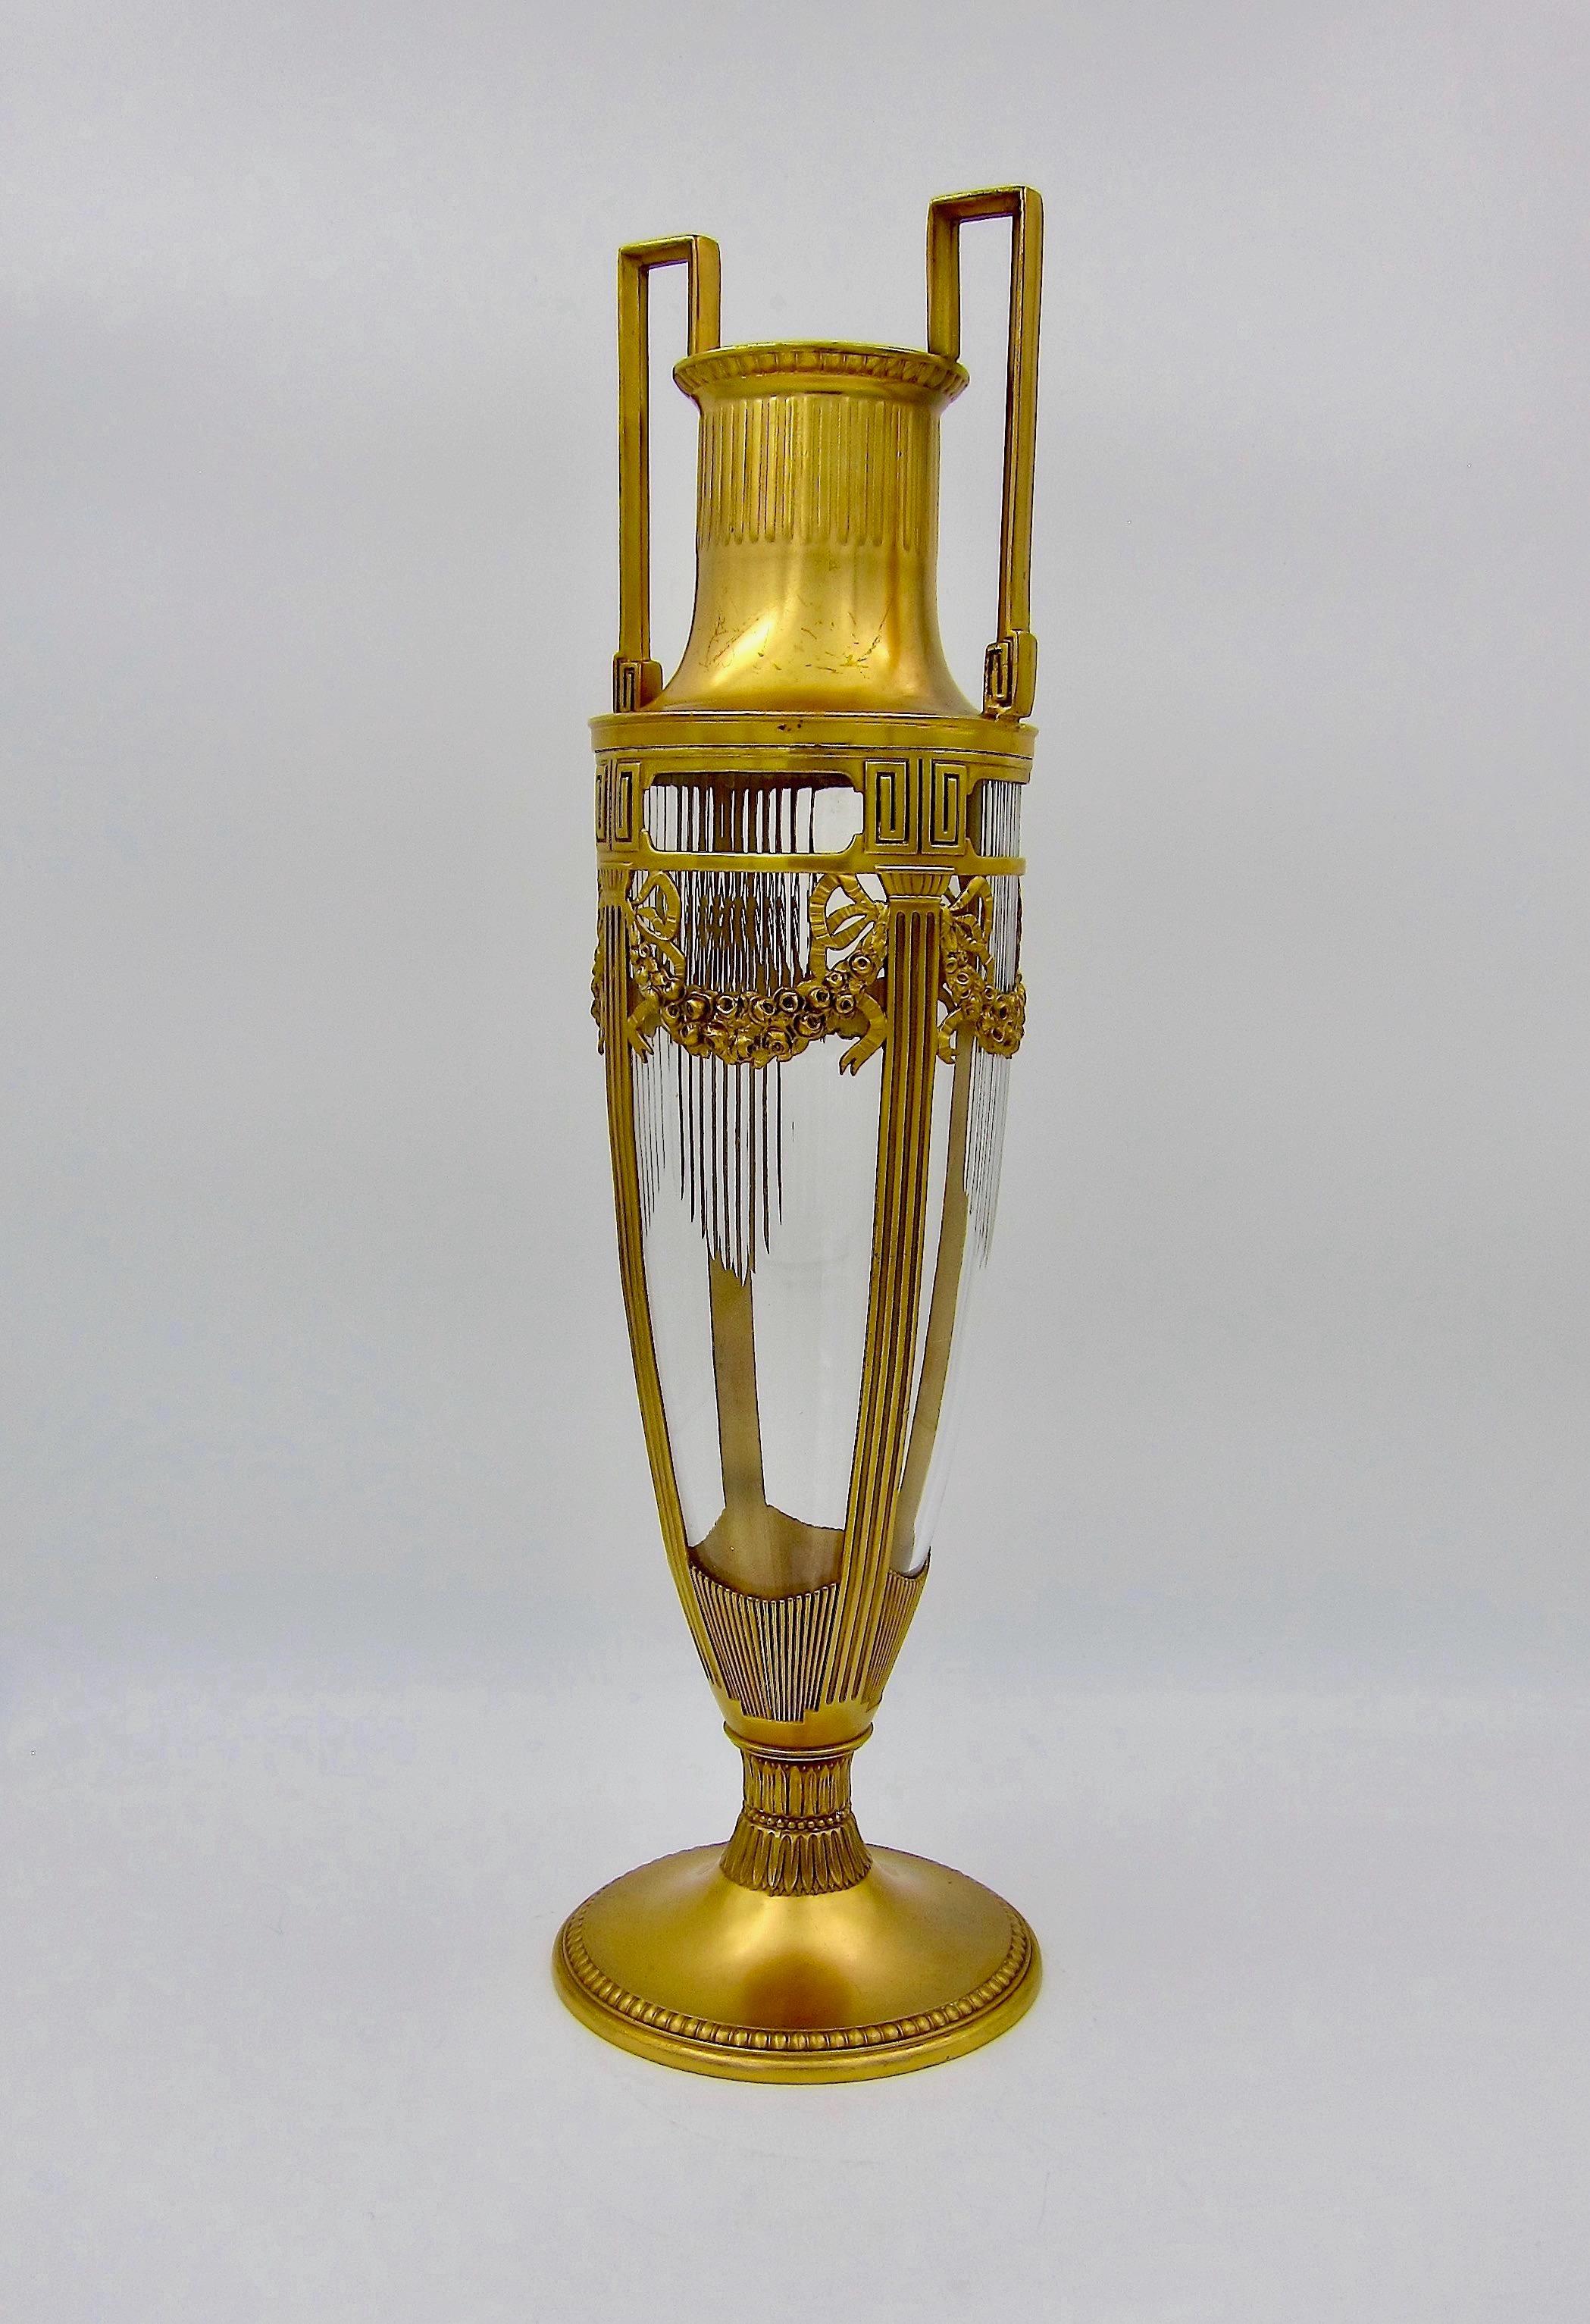 A large antique vase in the neoclassical style with gilt metal mounts and a heavy colorless cut crystal glass insert. The tall and slender two-handled vase is an impressive 15.75 in. height and was created circa 1905 during the Art Nouveau /